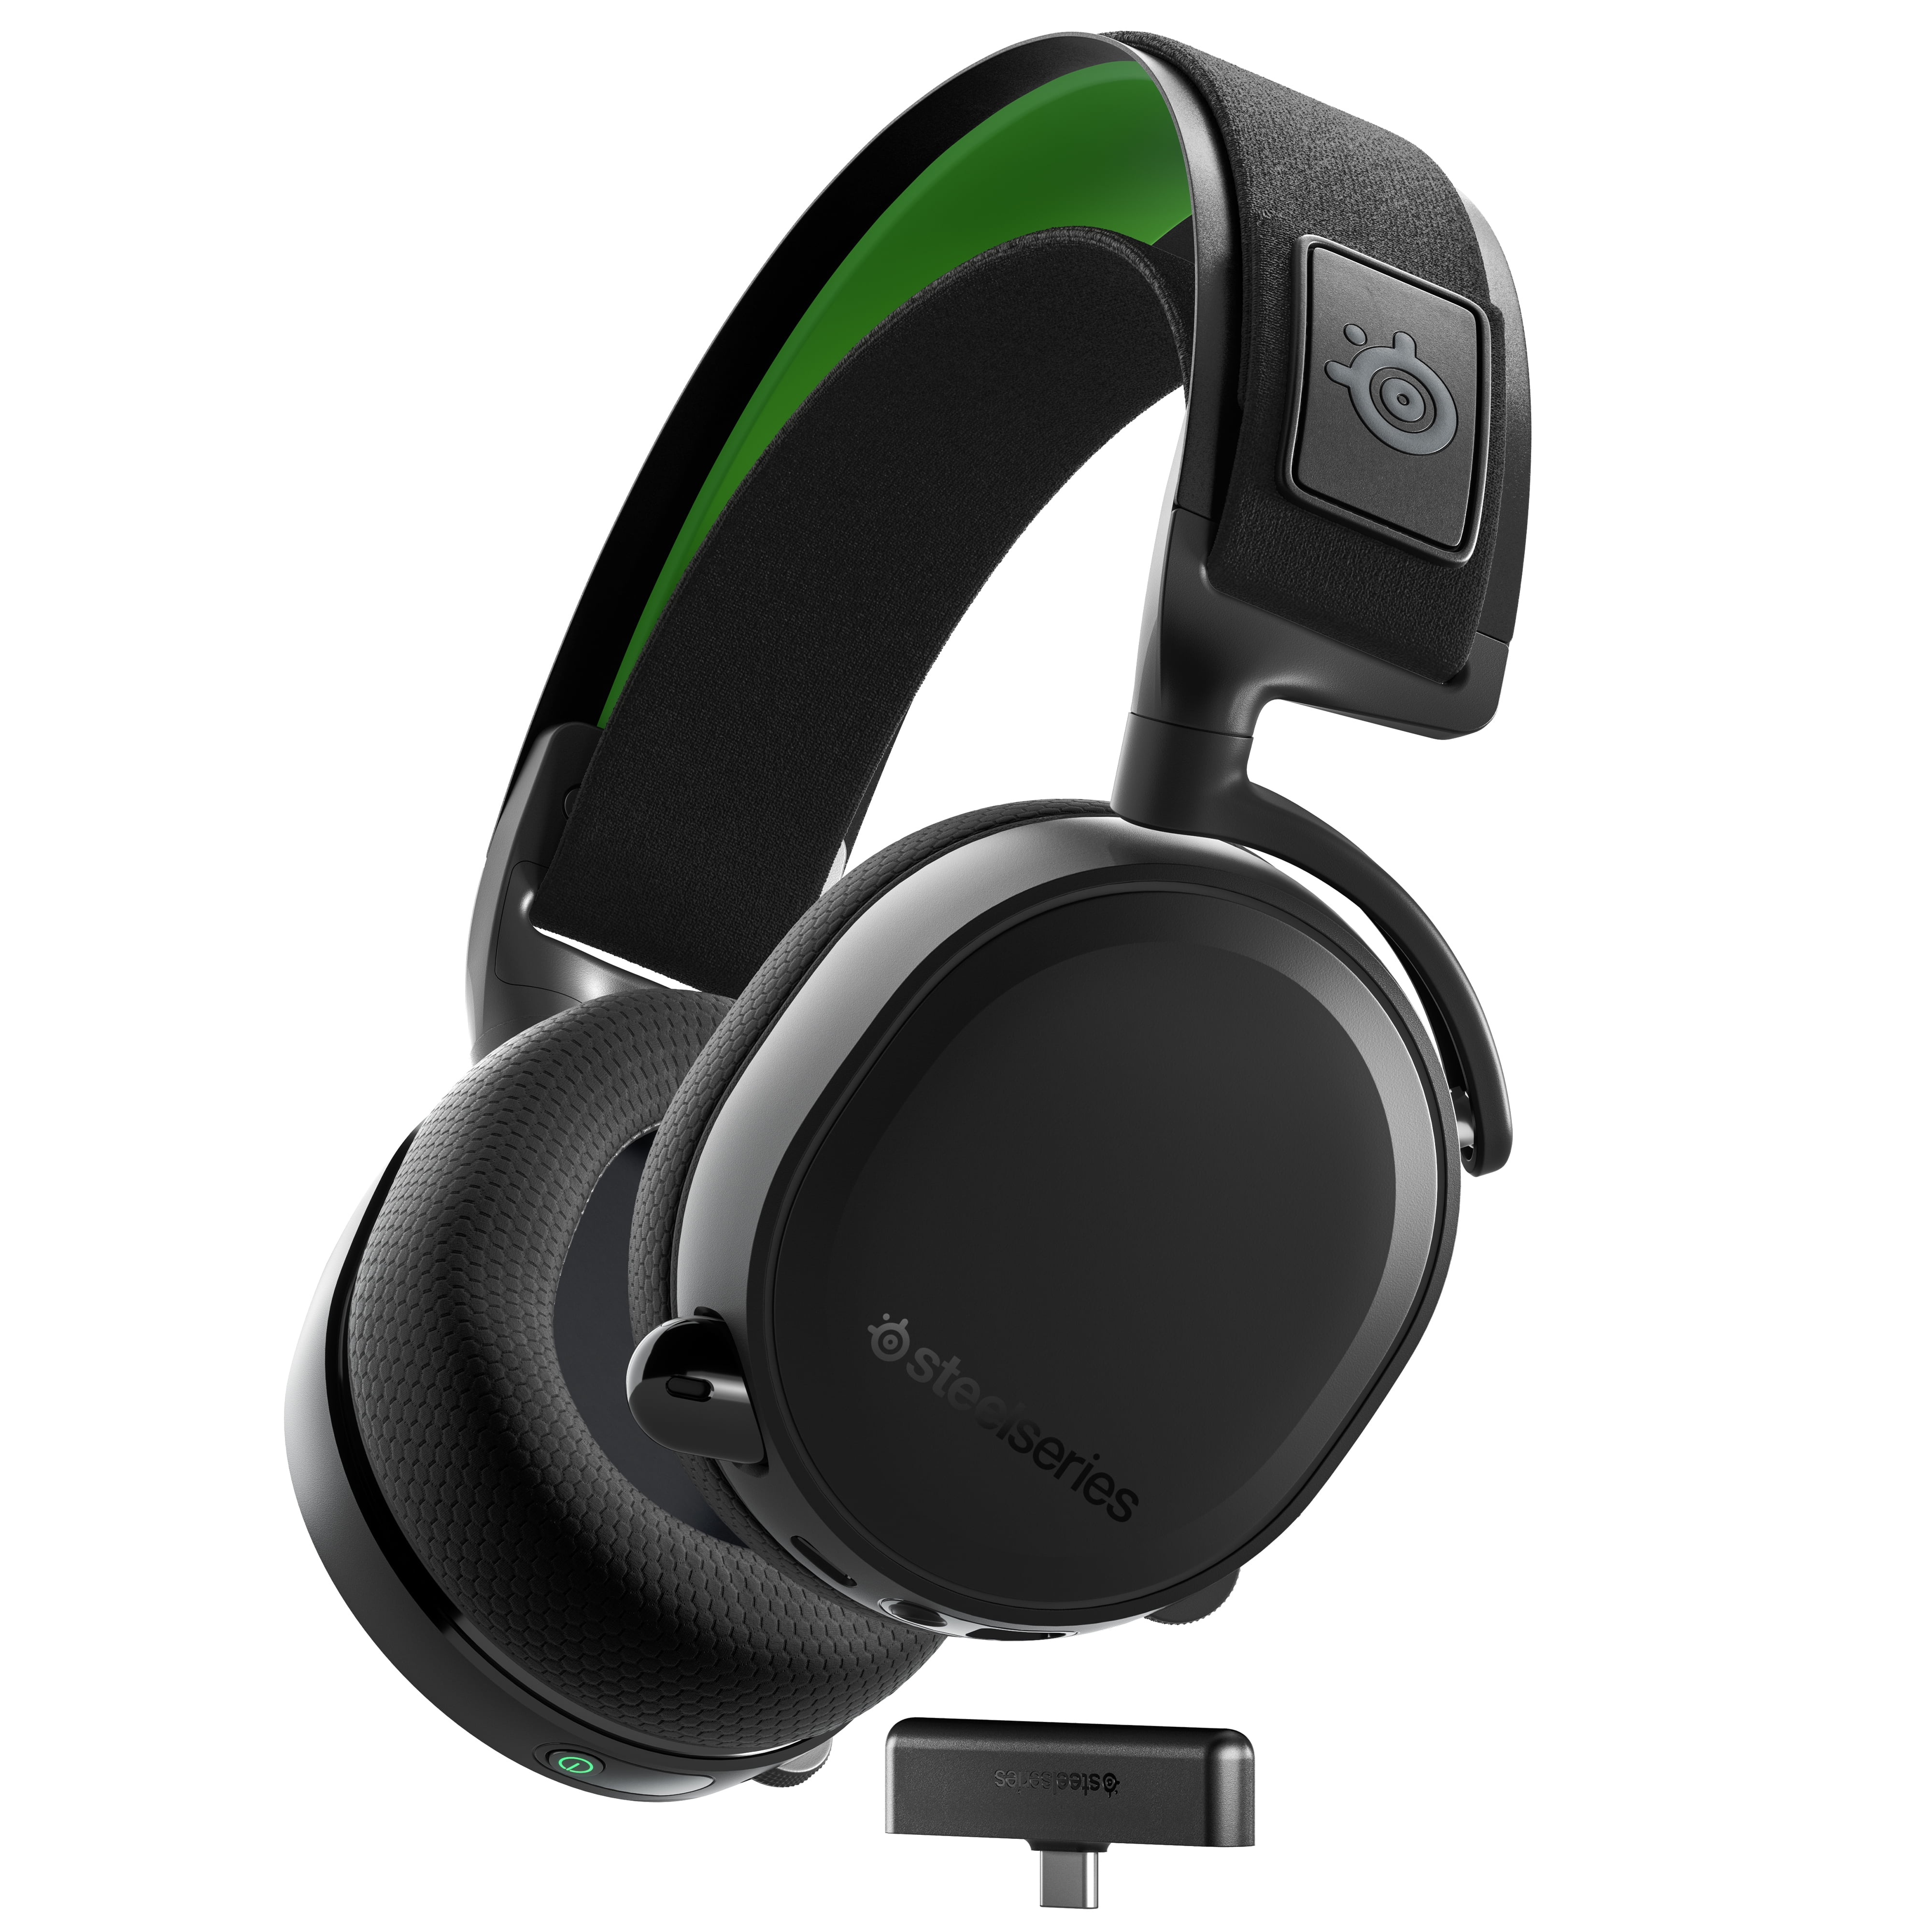 SteelSeries Arctis 7X+ Wireless Gaming Headset, 2.4 GHz Wireless, 30 Hour Battery Life, USB-C, Xbox Series X|S, Xbox One, PC, Android, Oculus Quest 2, USB-C iPads. and Nintendo Switch